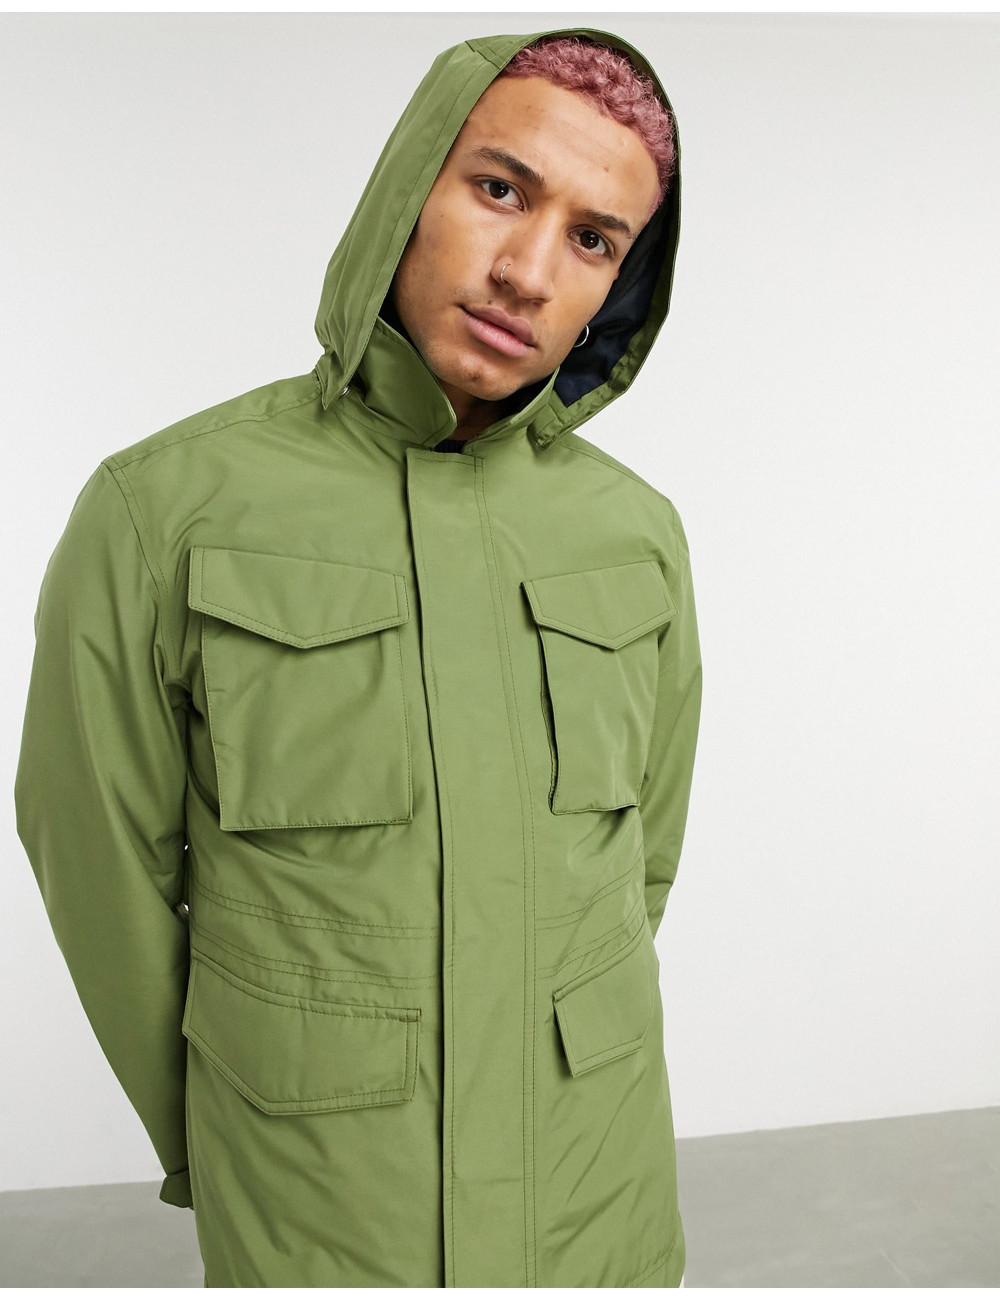 Timberland 3in1 m65 jacket